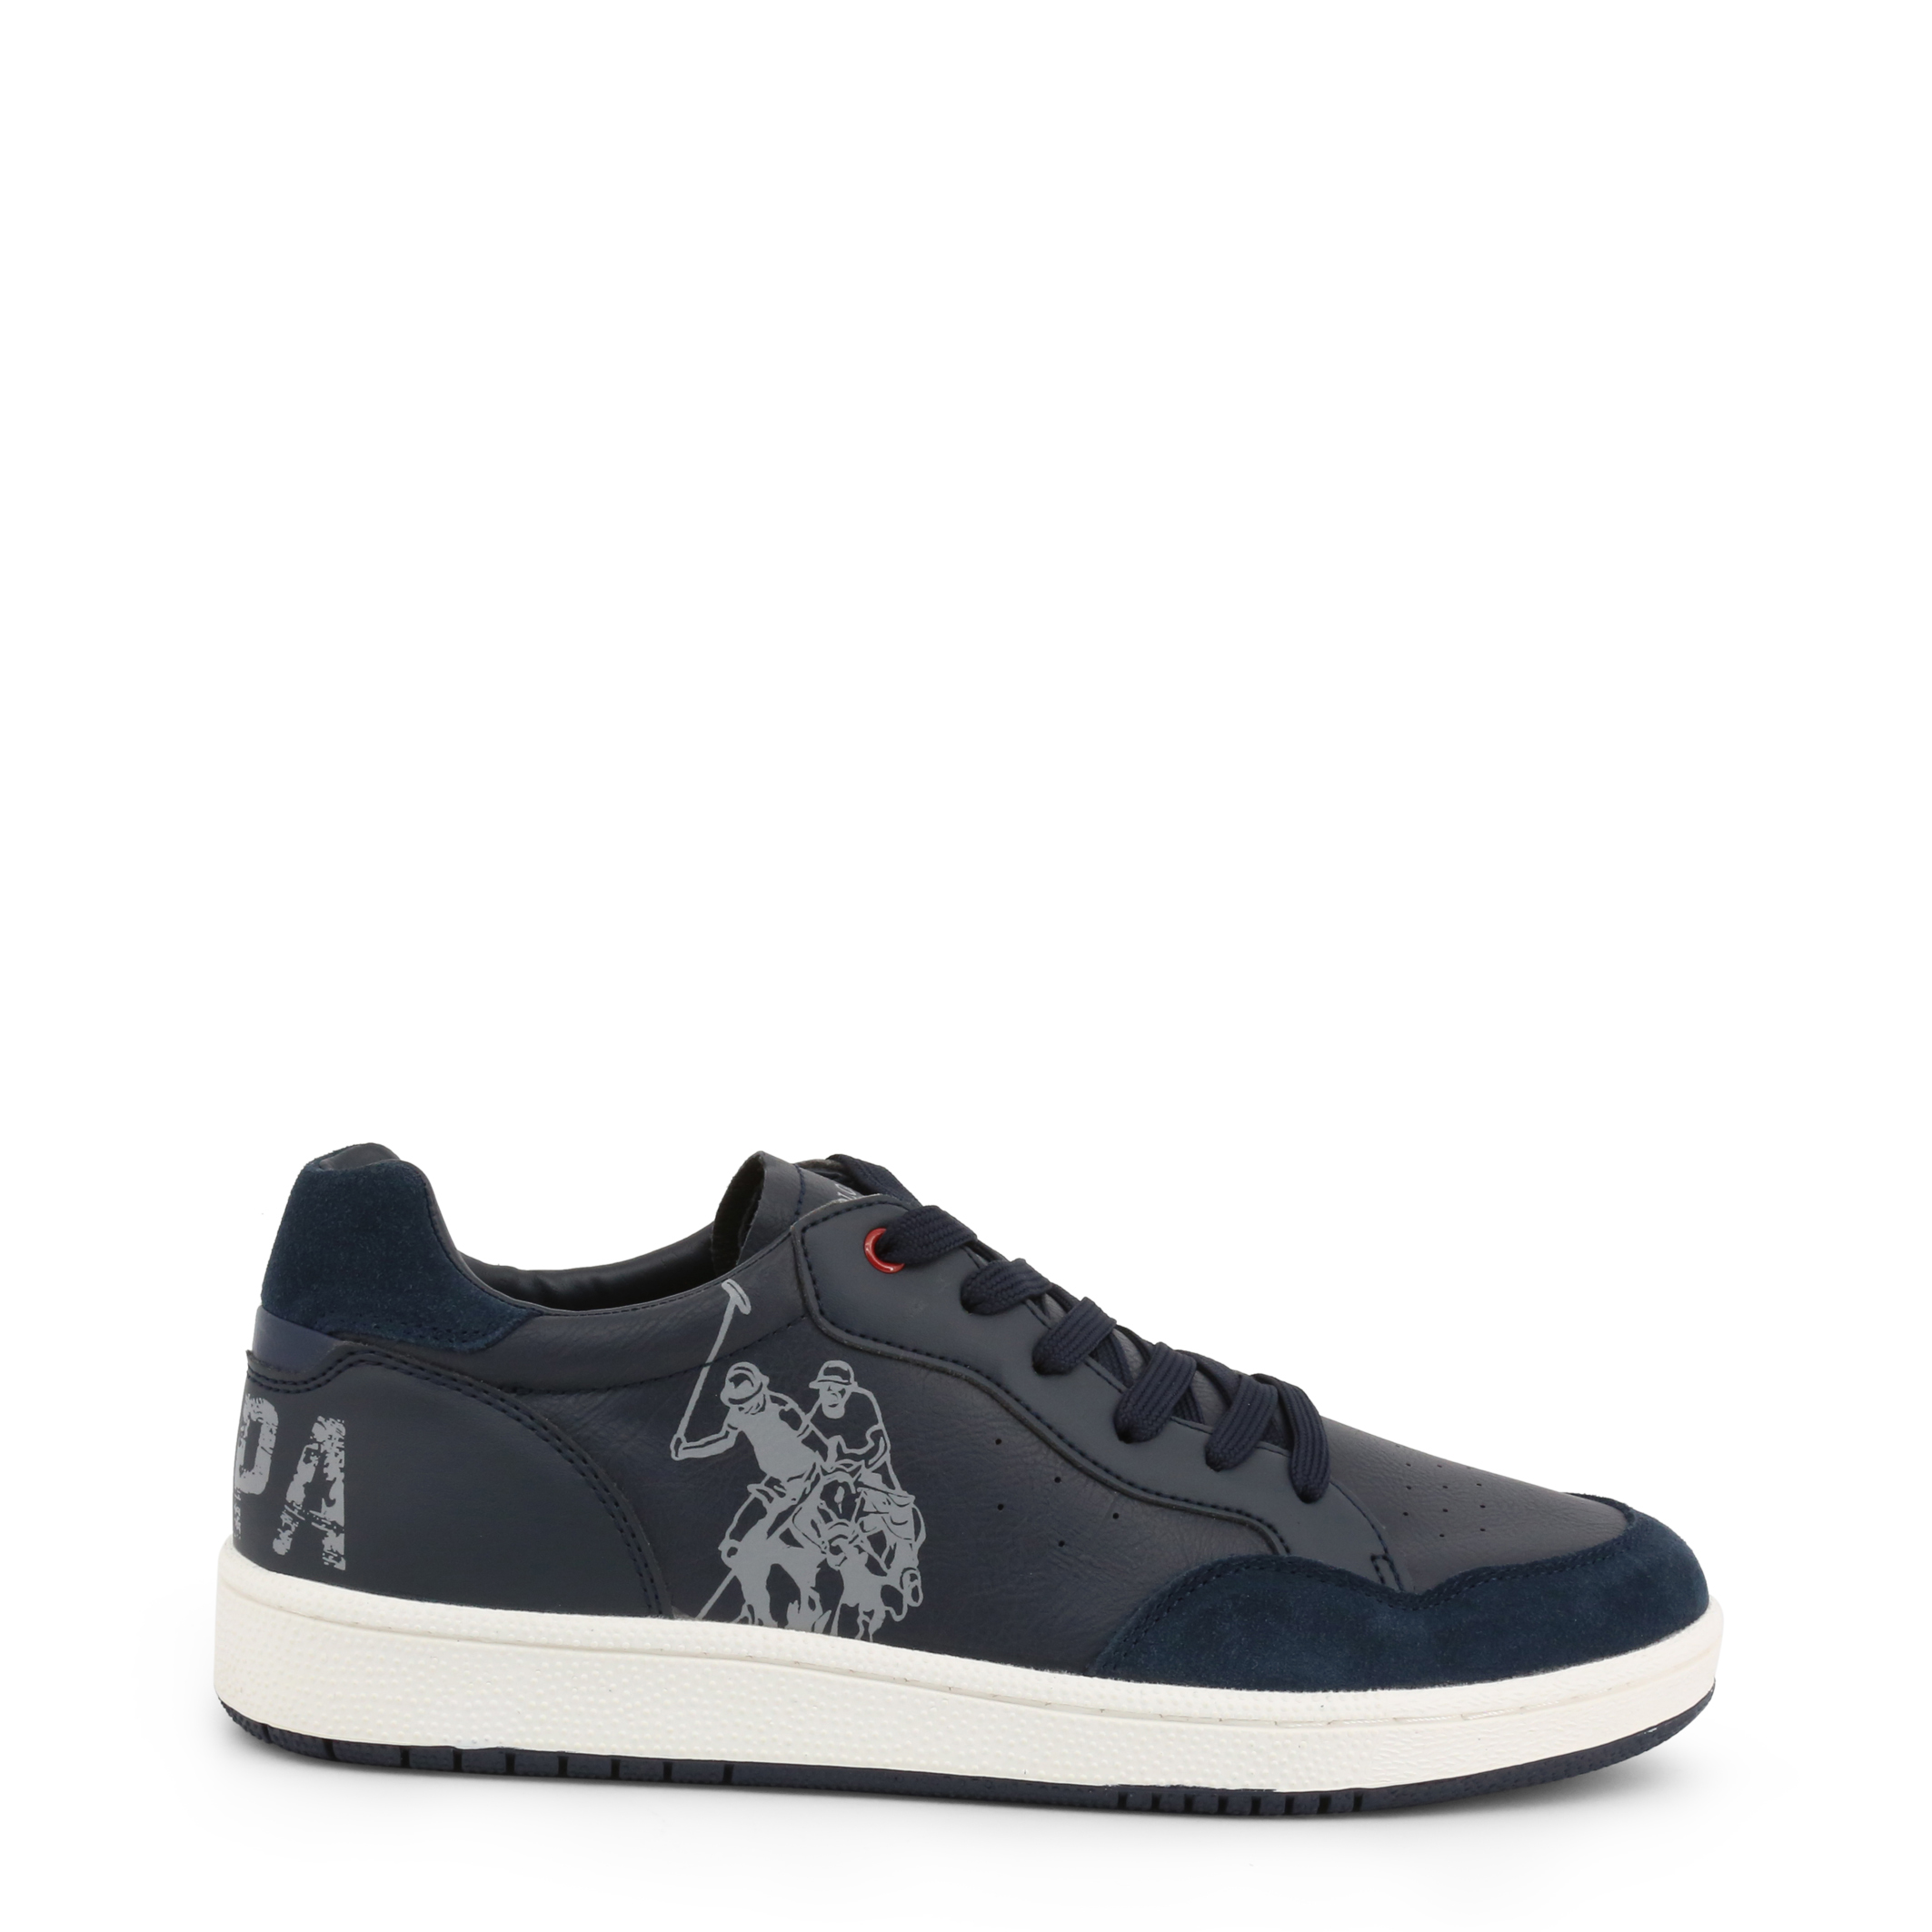 Chaussures sneakers u.s. Polo assn. Homme eu 40